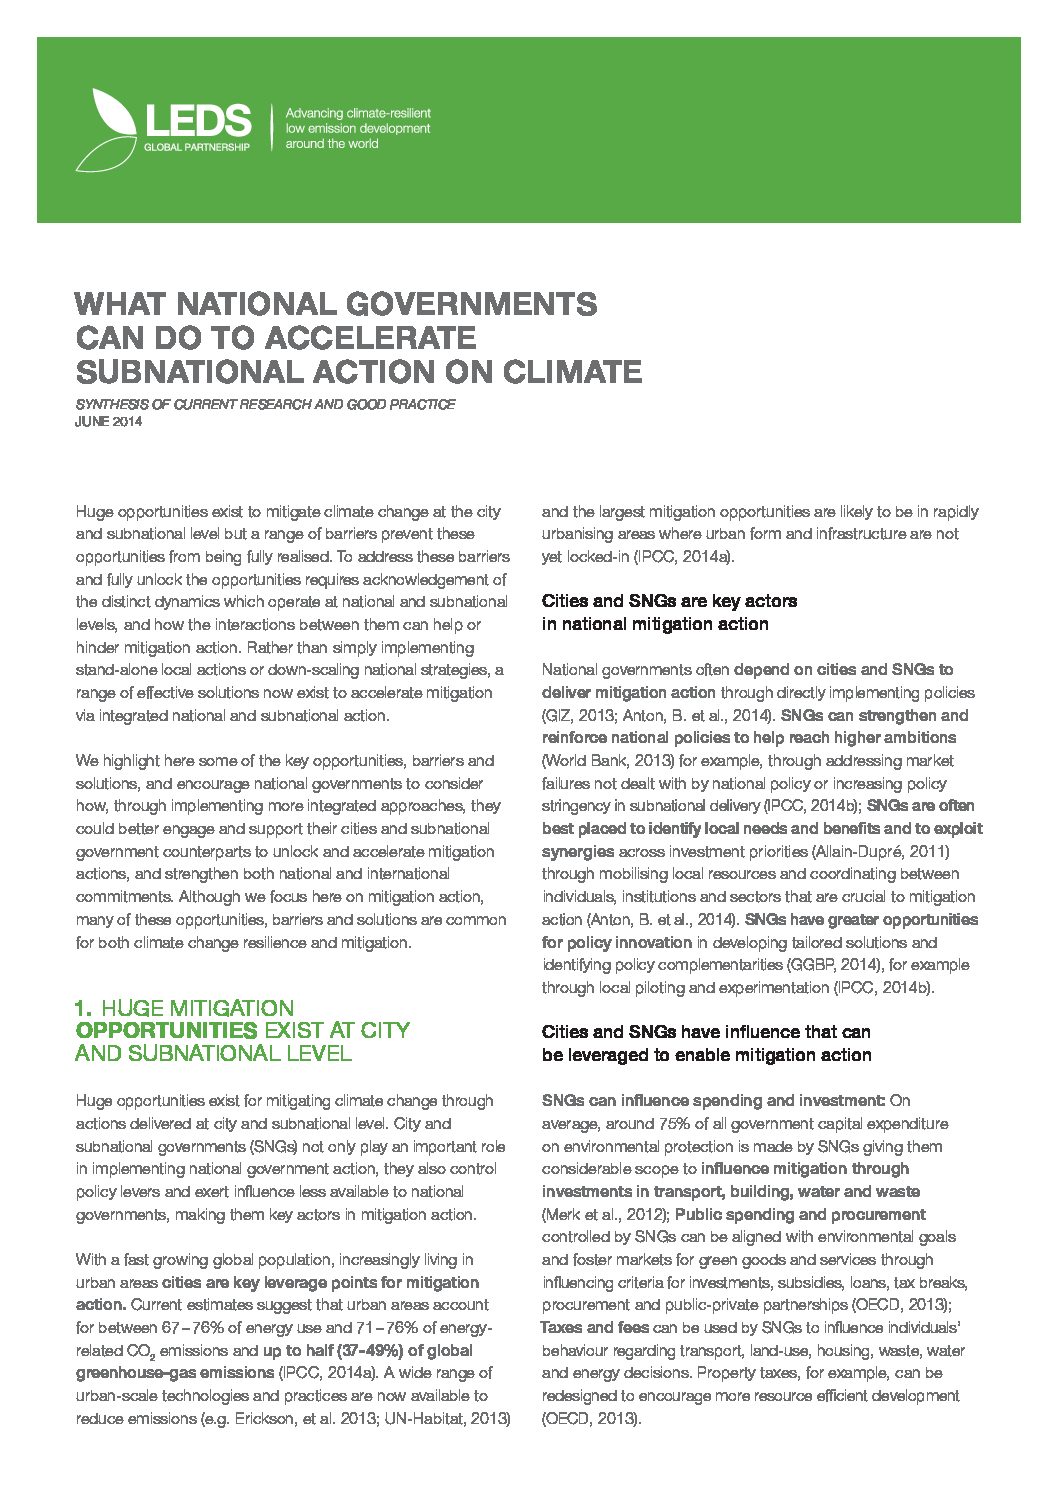 New Publication: What National Governments Can Do to Accelerate Subnational Action on Climate